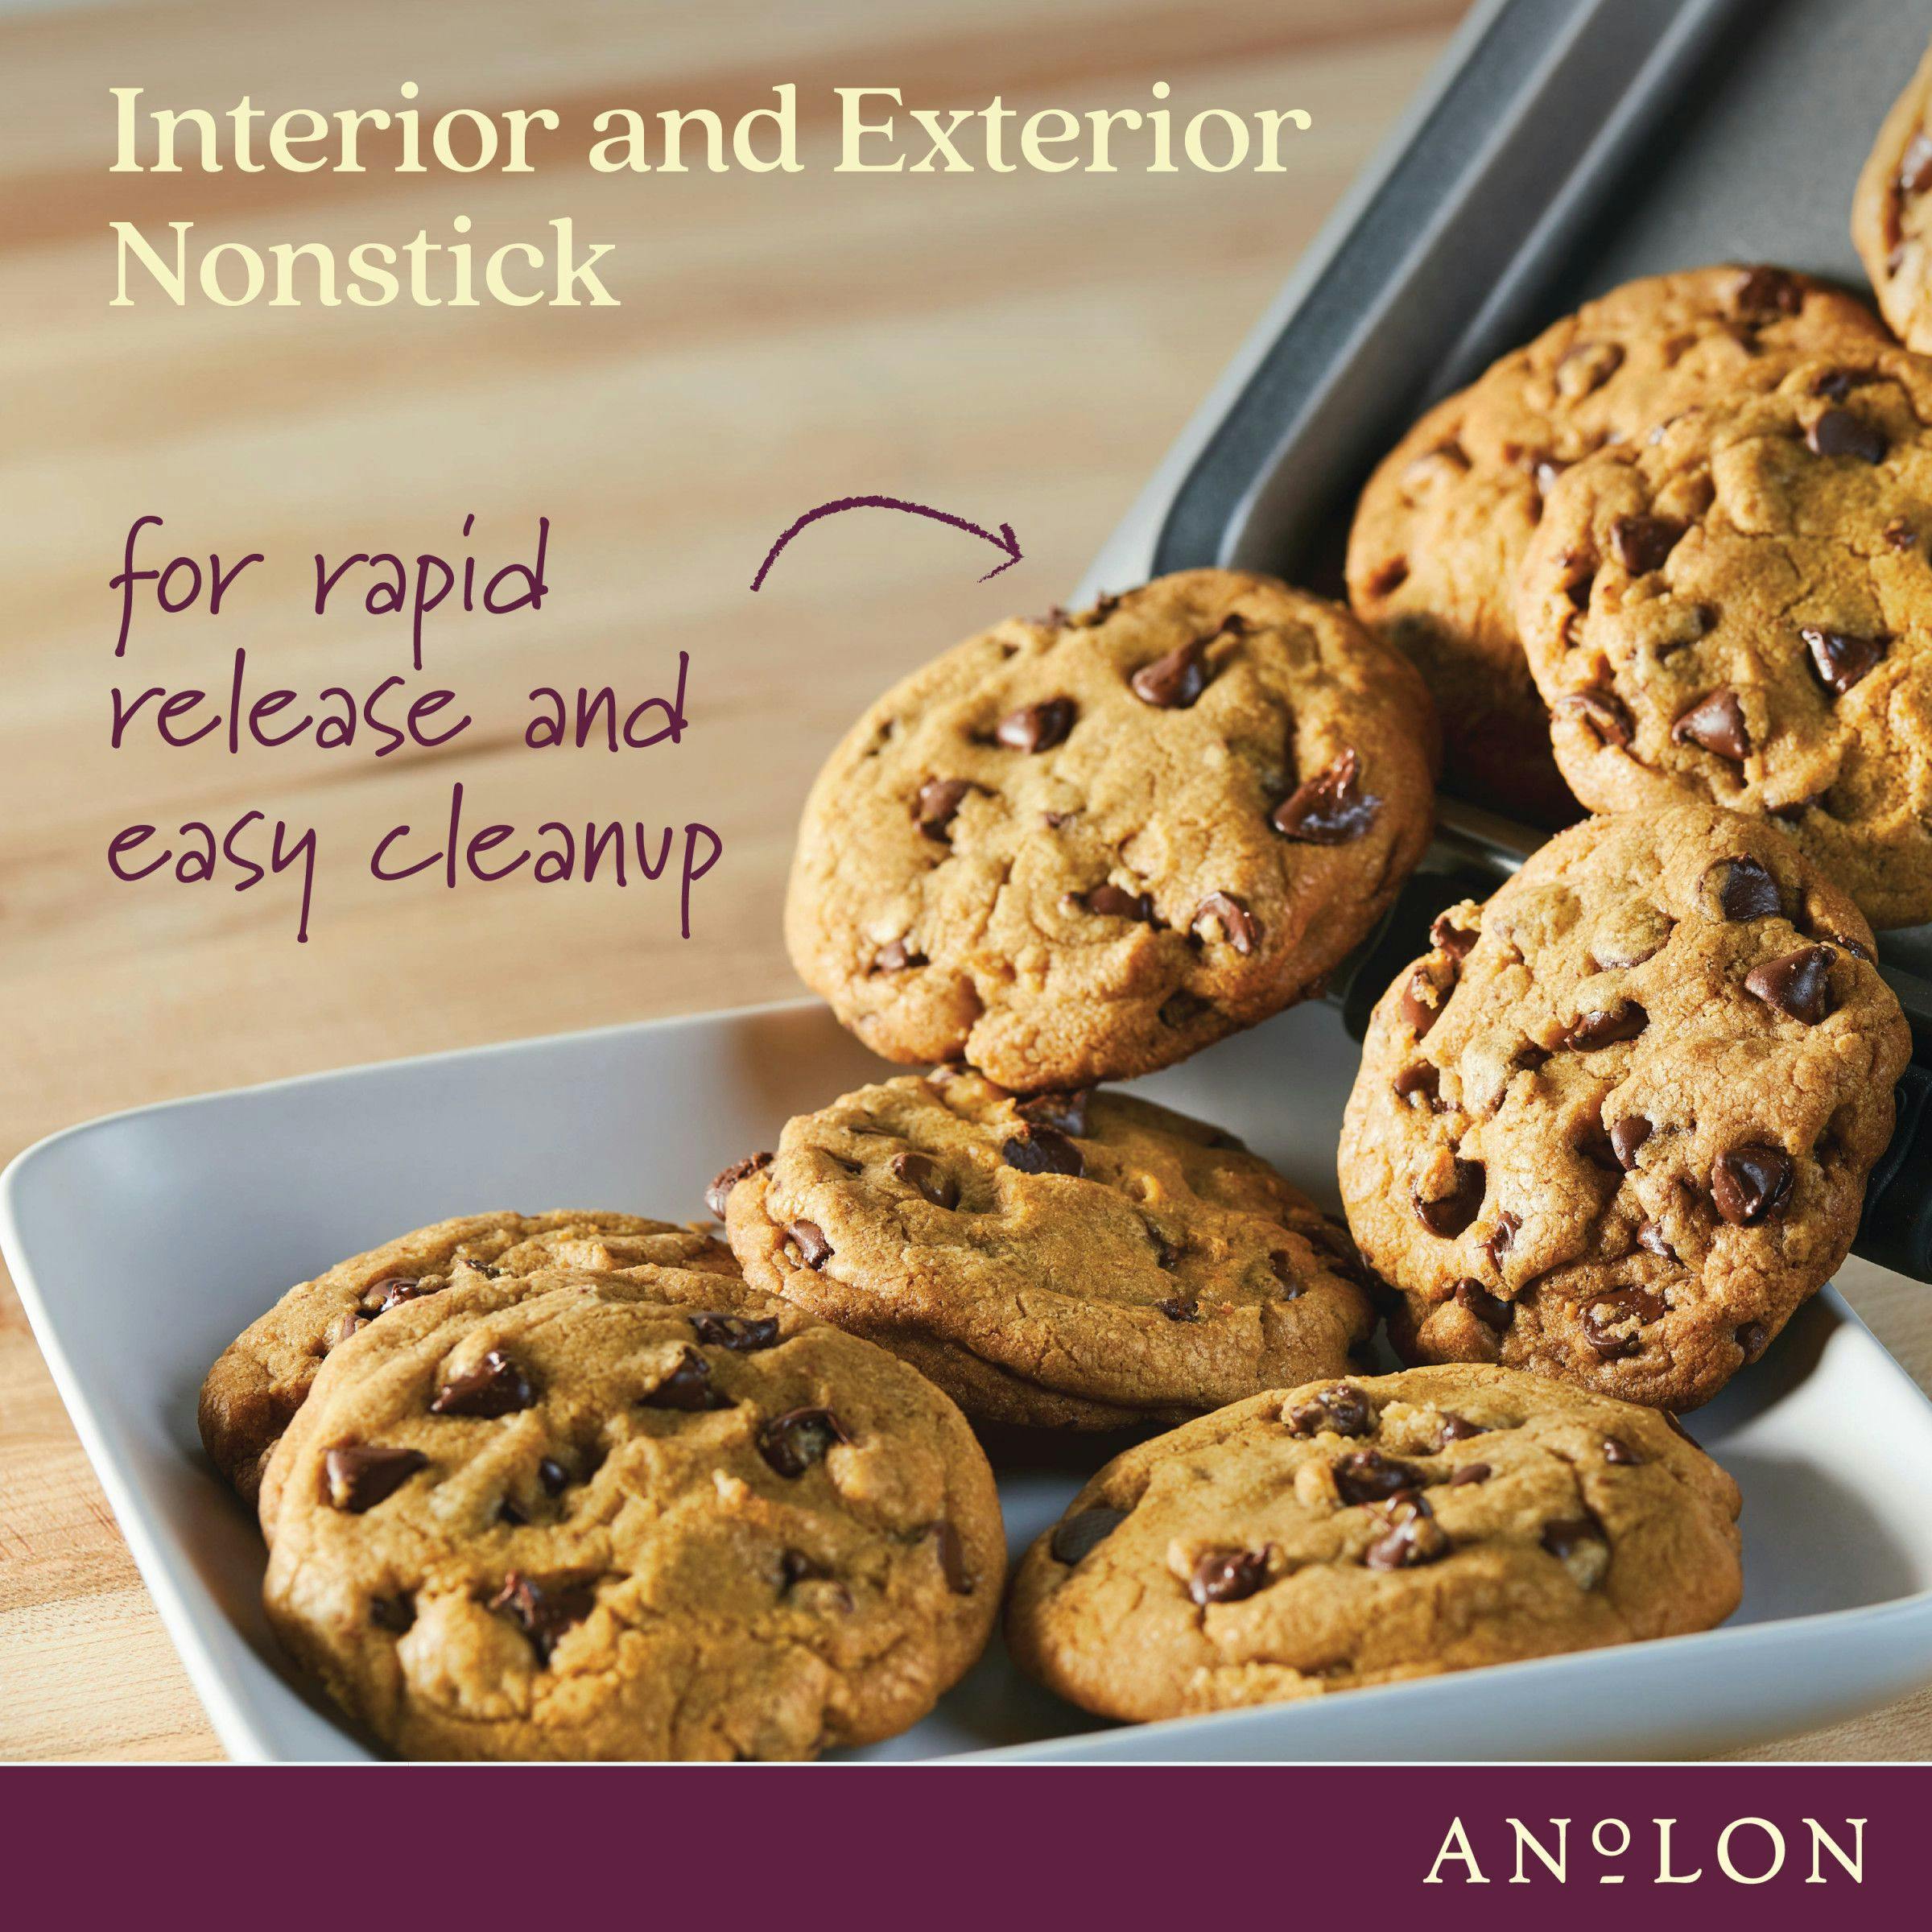 Anolon Advanced Nonstick Bakeware Set with Silicone Grips, 5-Piece, Gray